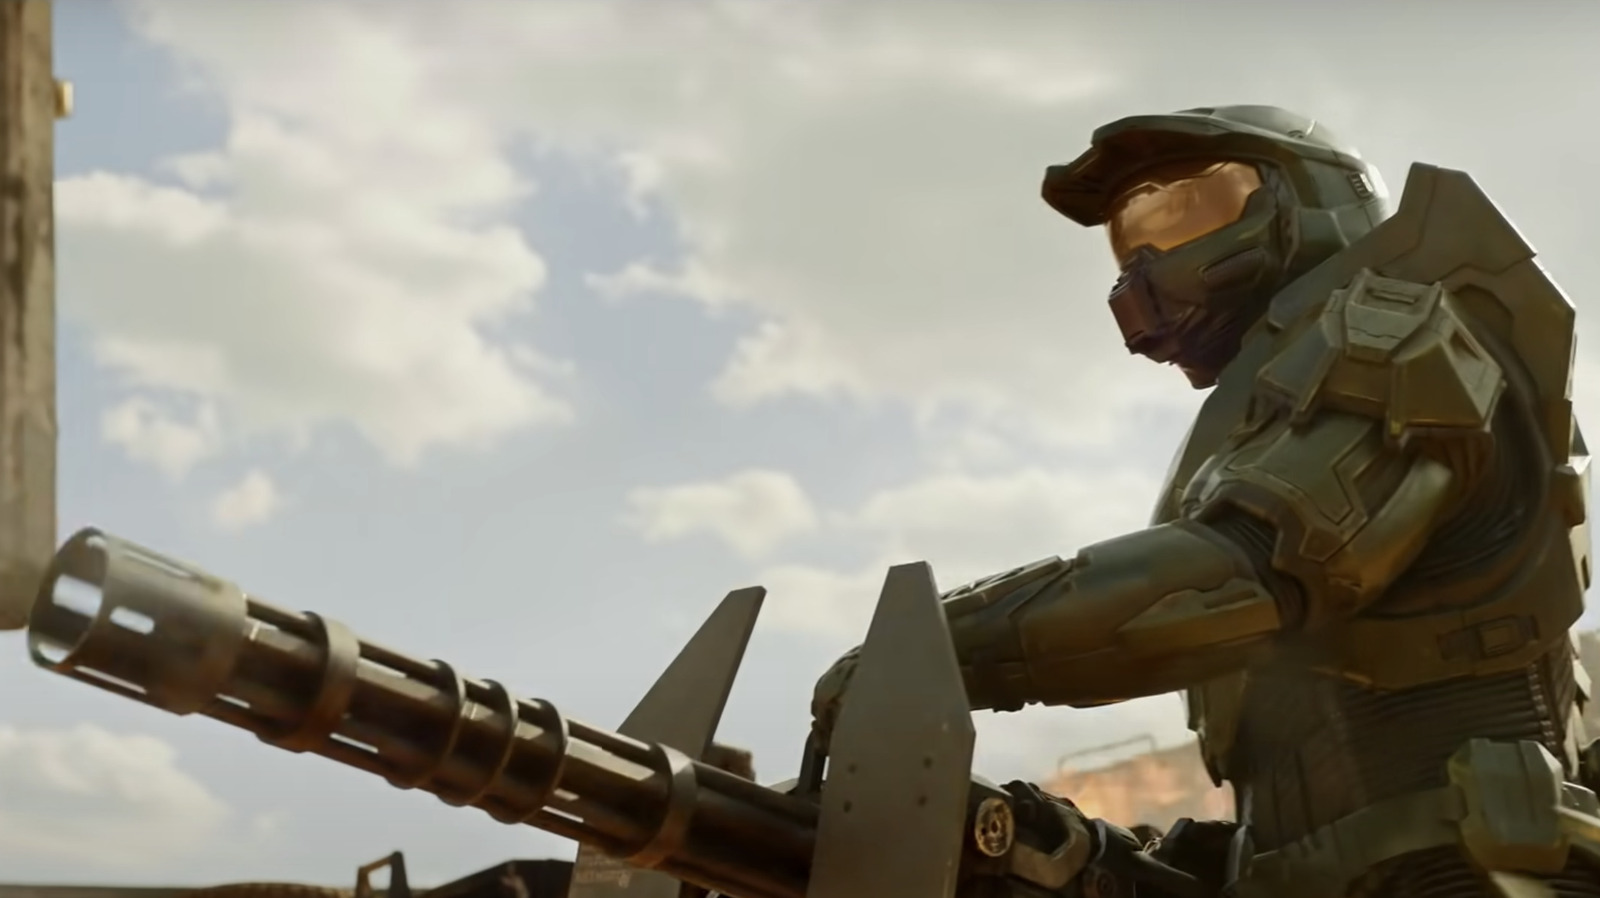 Halo Season 2 confirmed and on a path to filming says Kiki Wolfkill